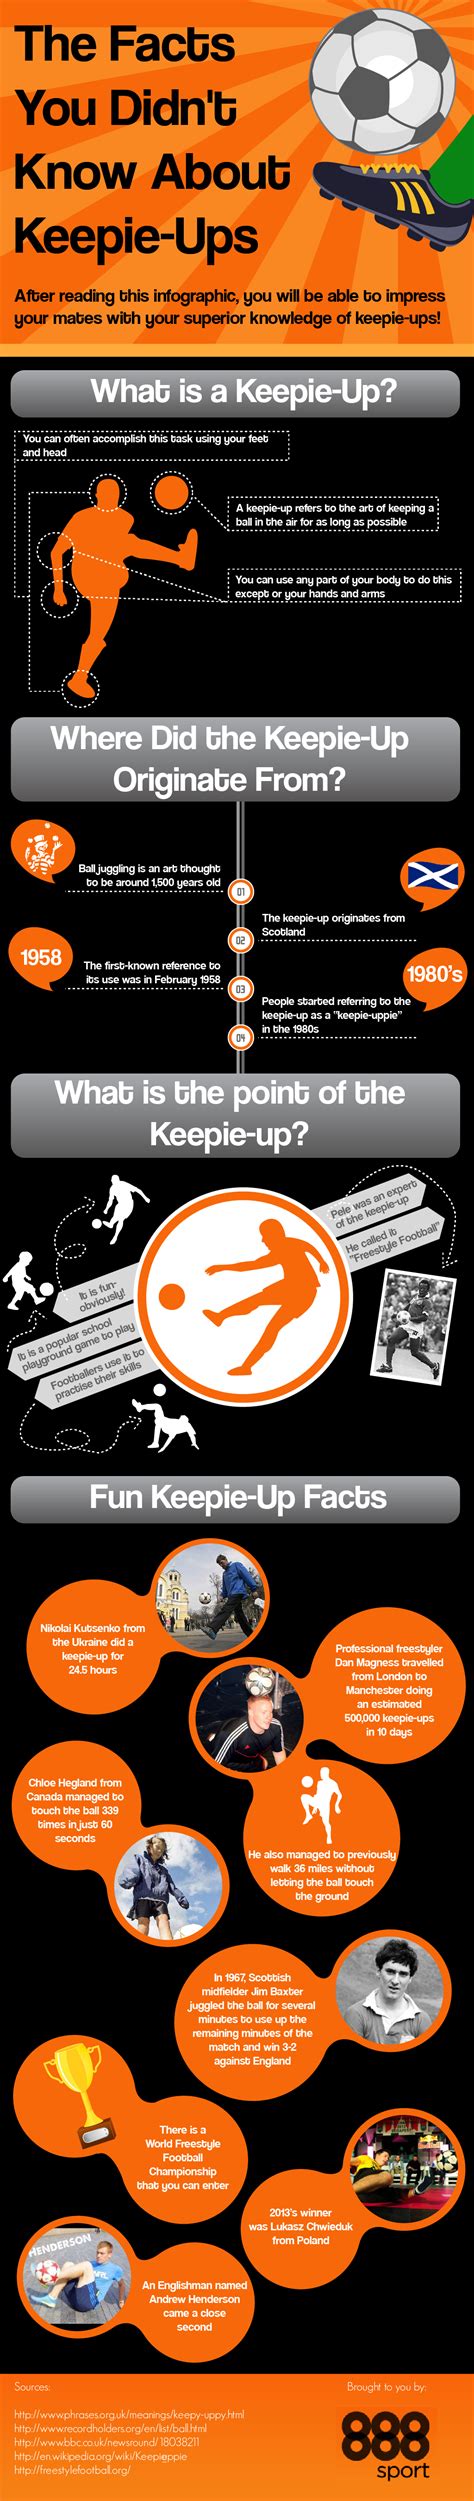 the facts you didn t know about keepie ups infographic visualistan